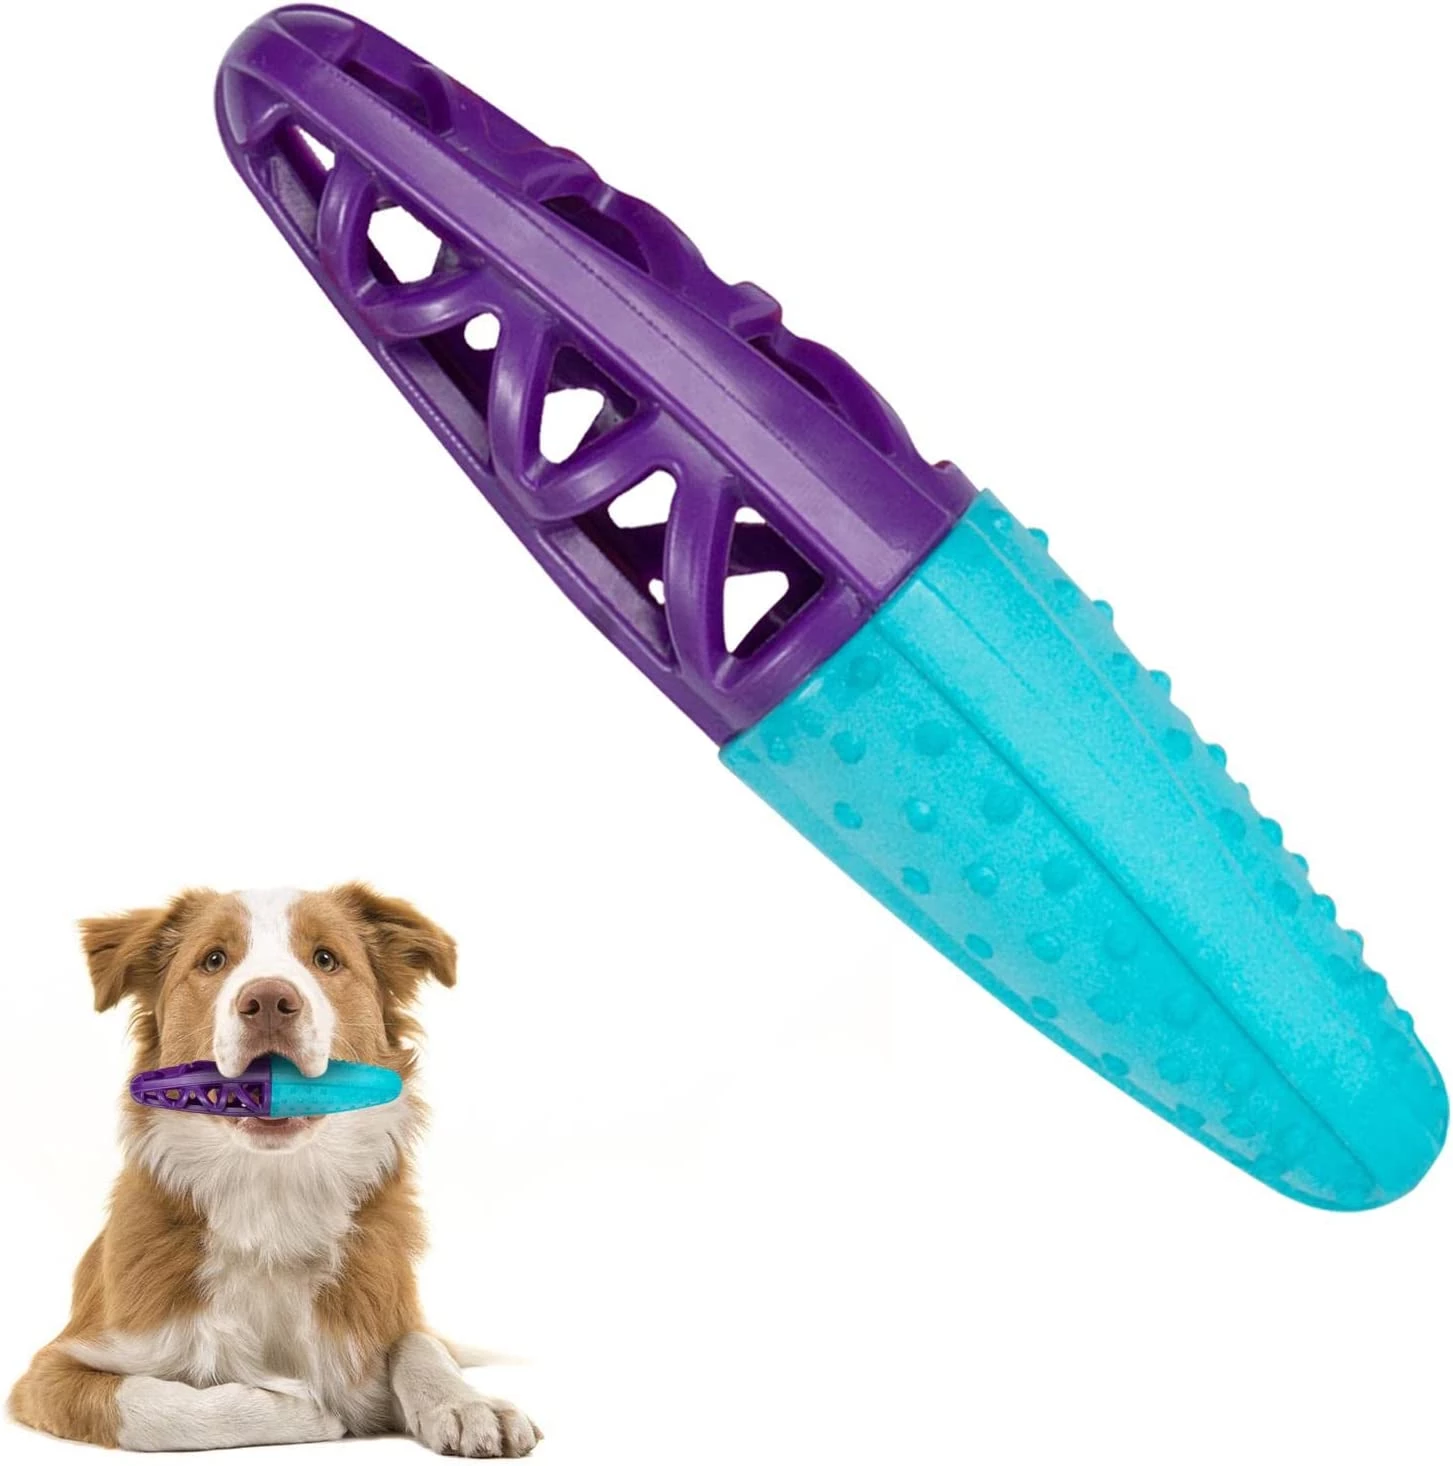 Dog chewing toy 